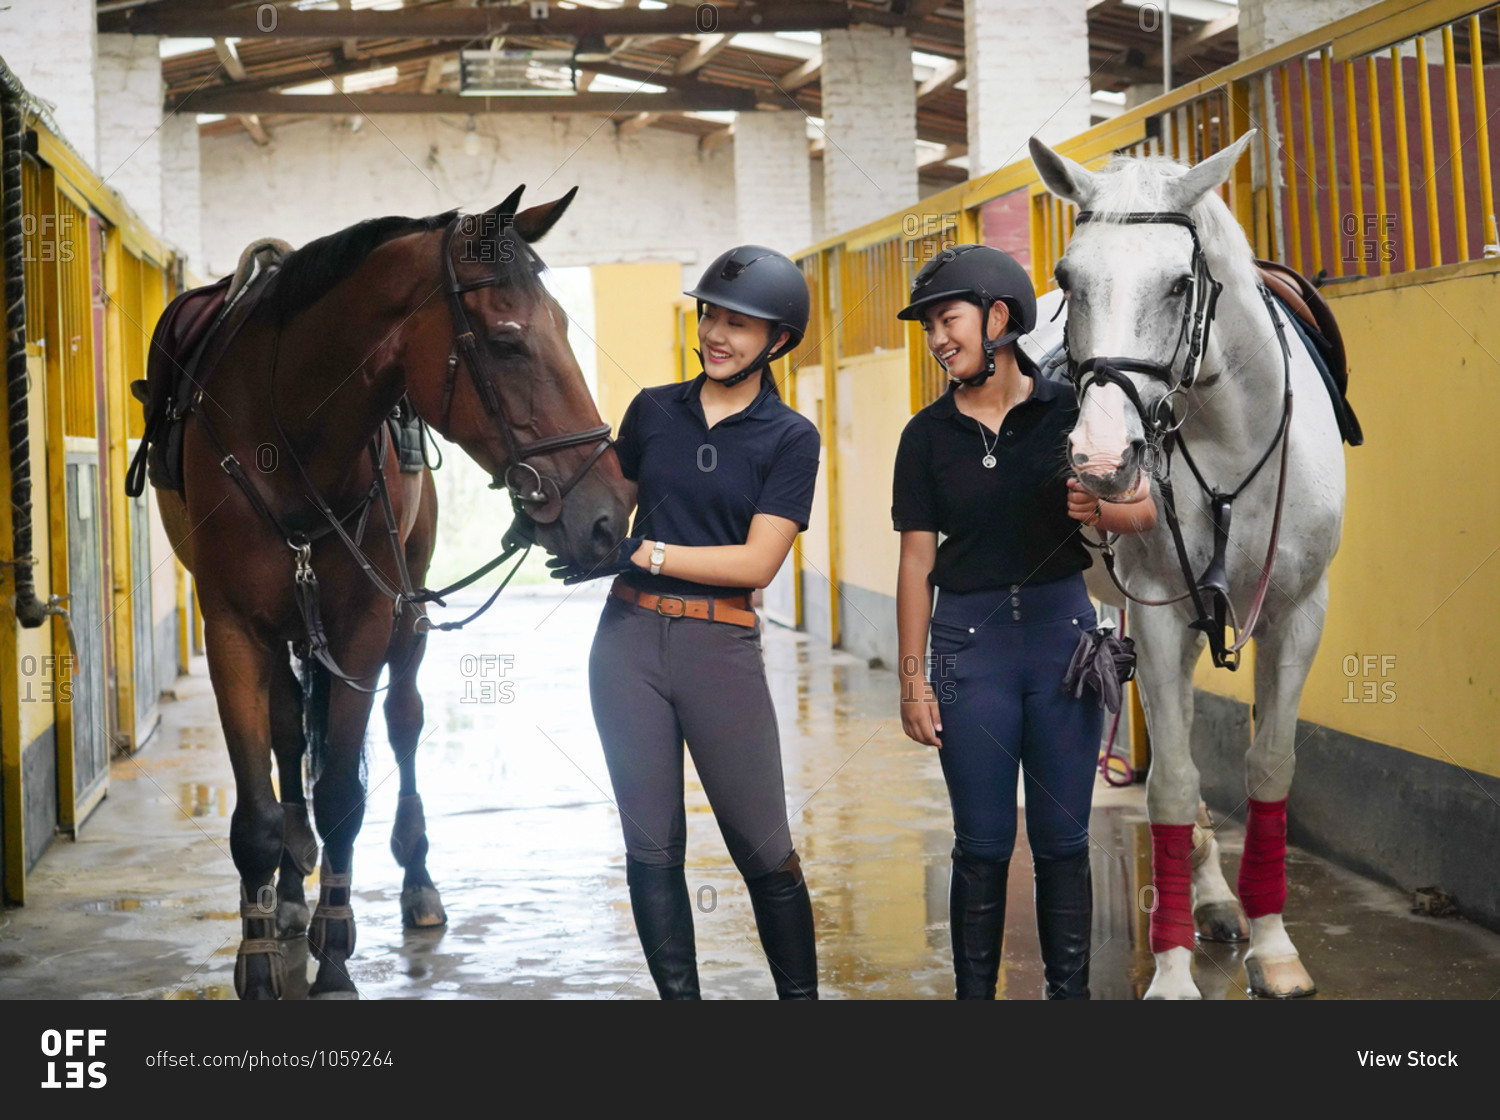 The horse stable to chat happy sisters stock photo -\
OFFSET